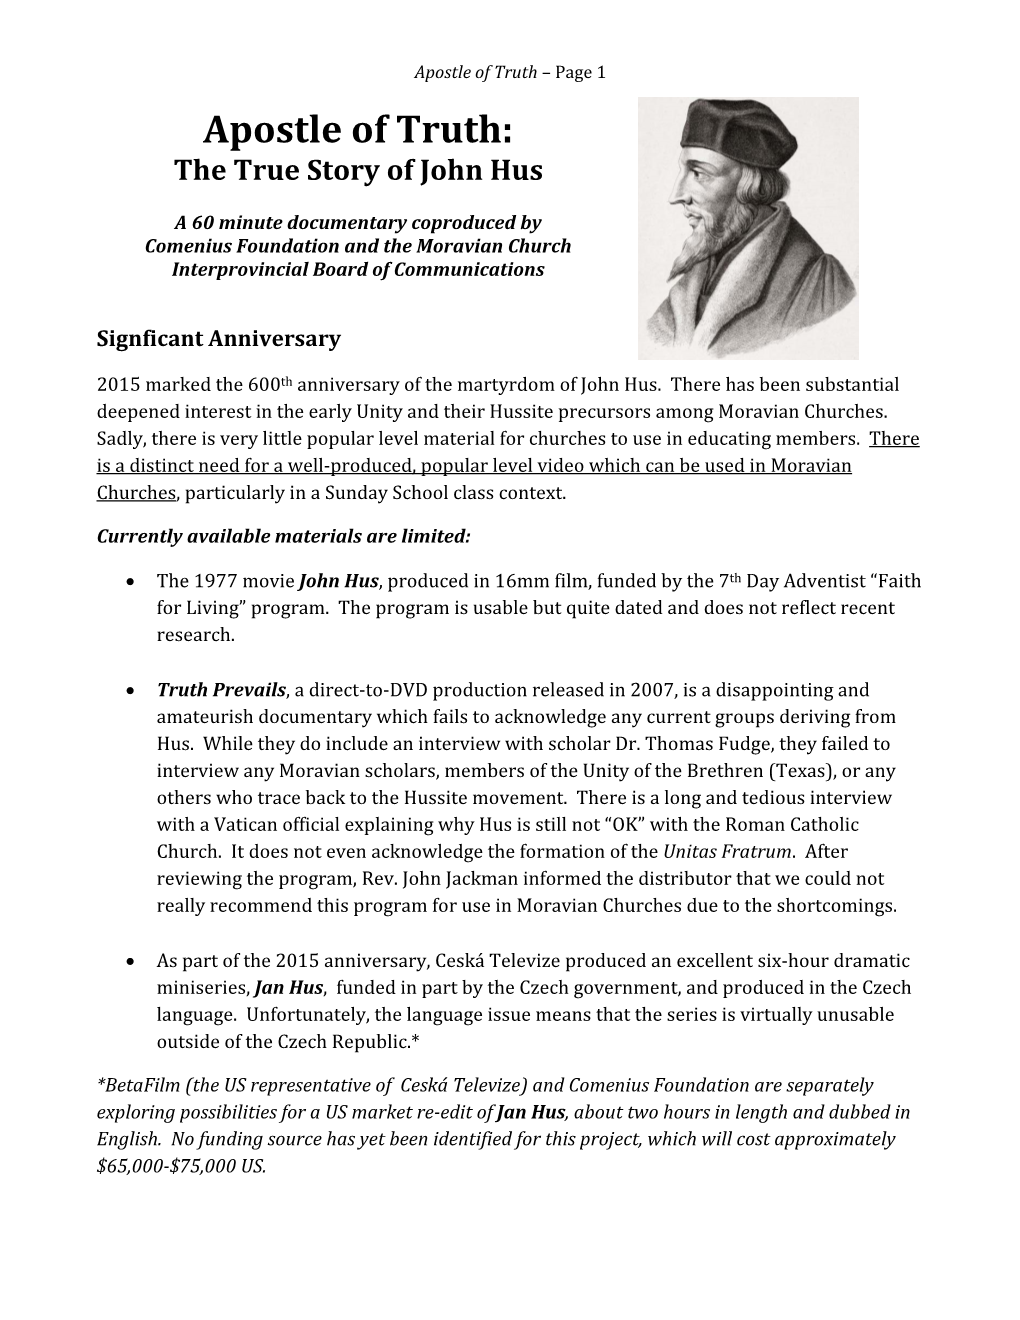 Apostle of Truth: the True Story of John Hus